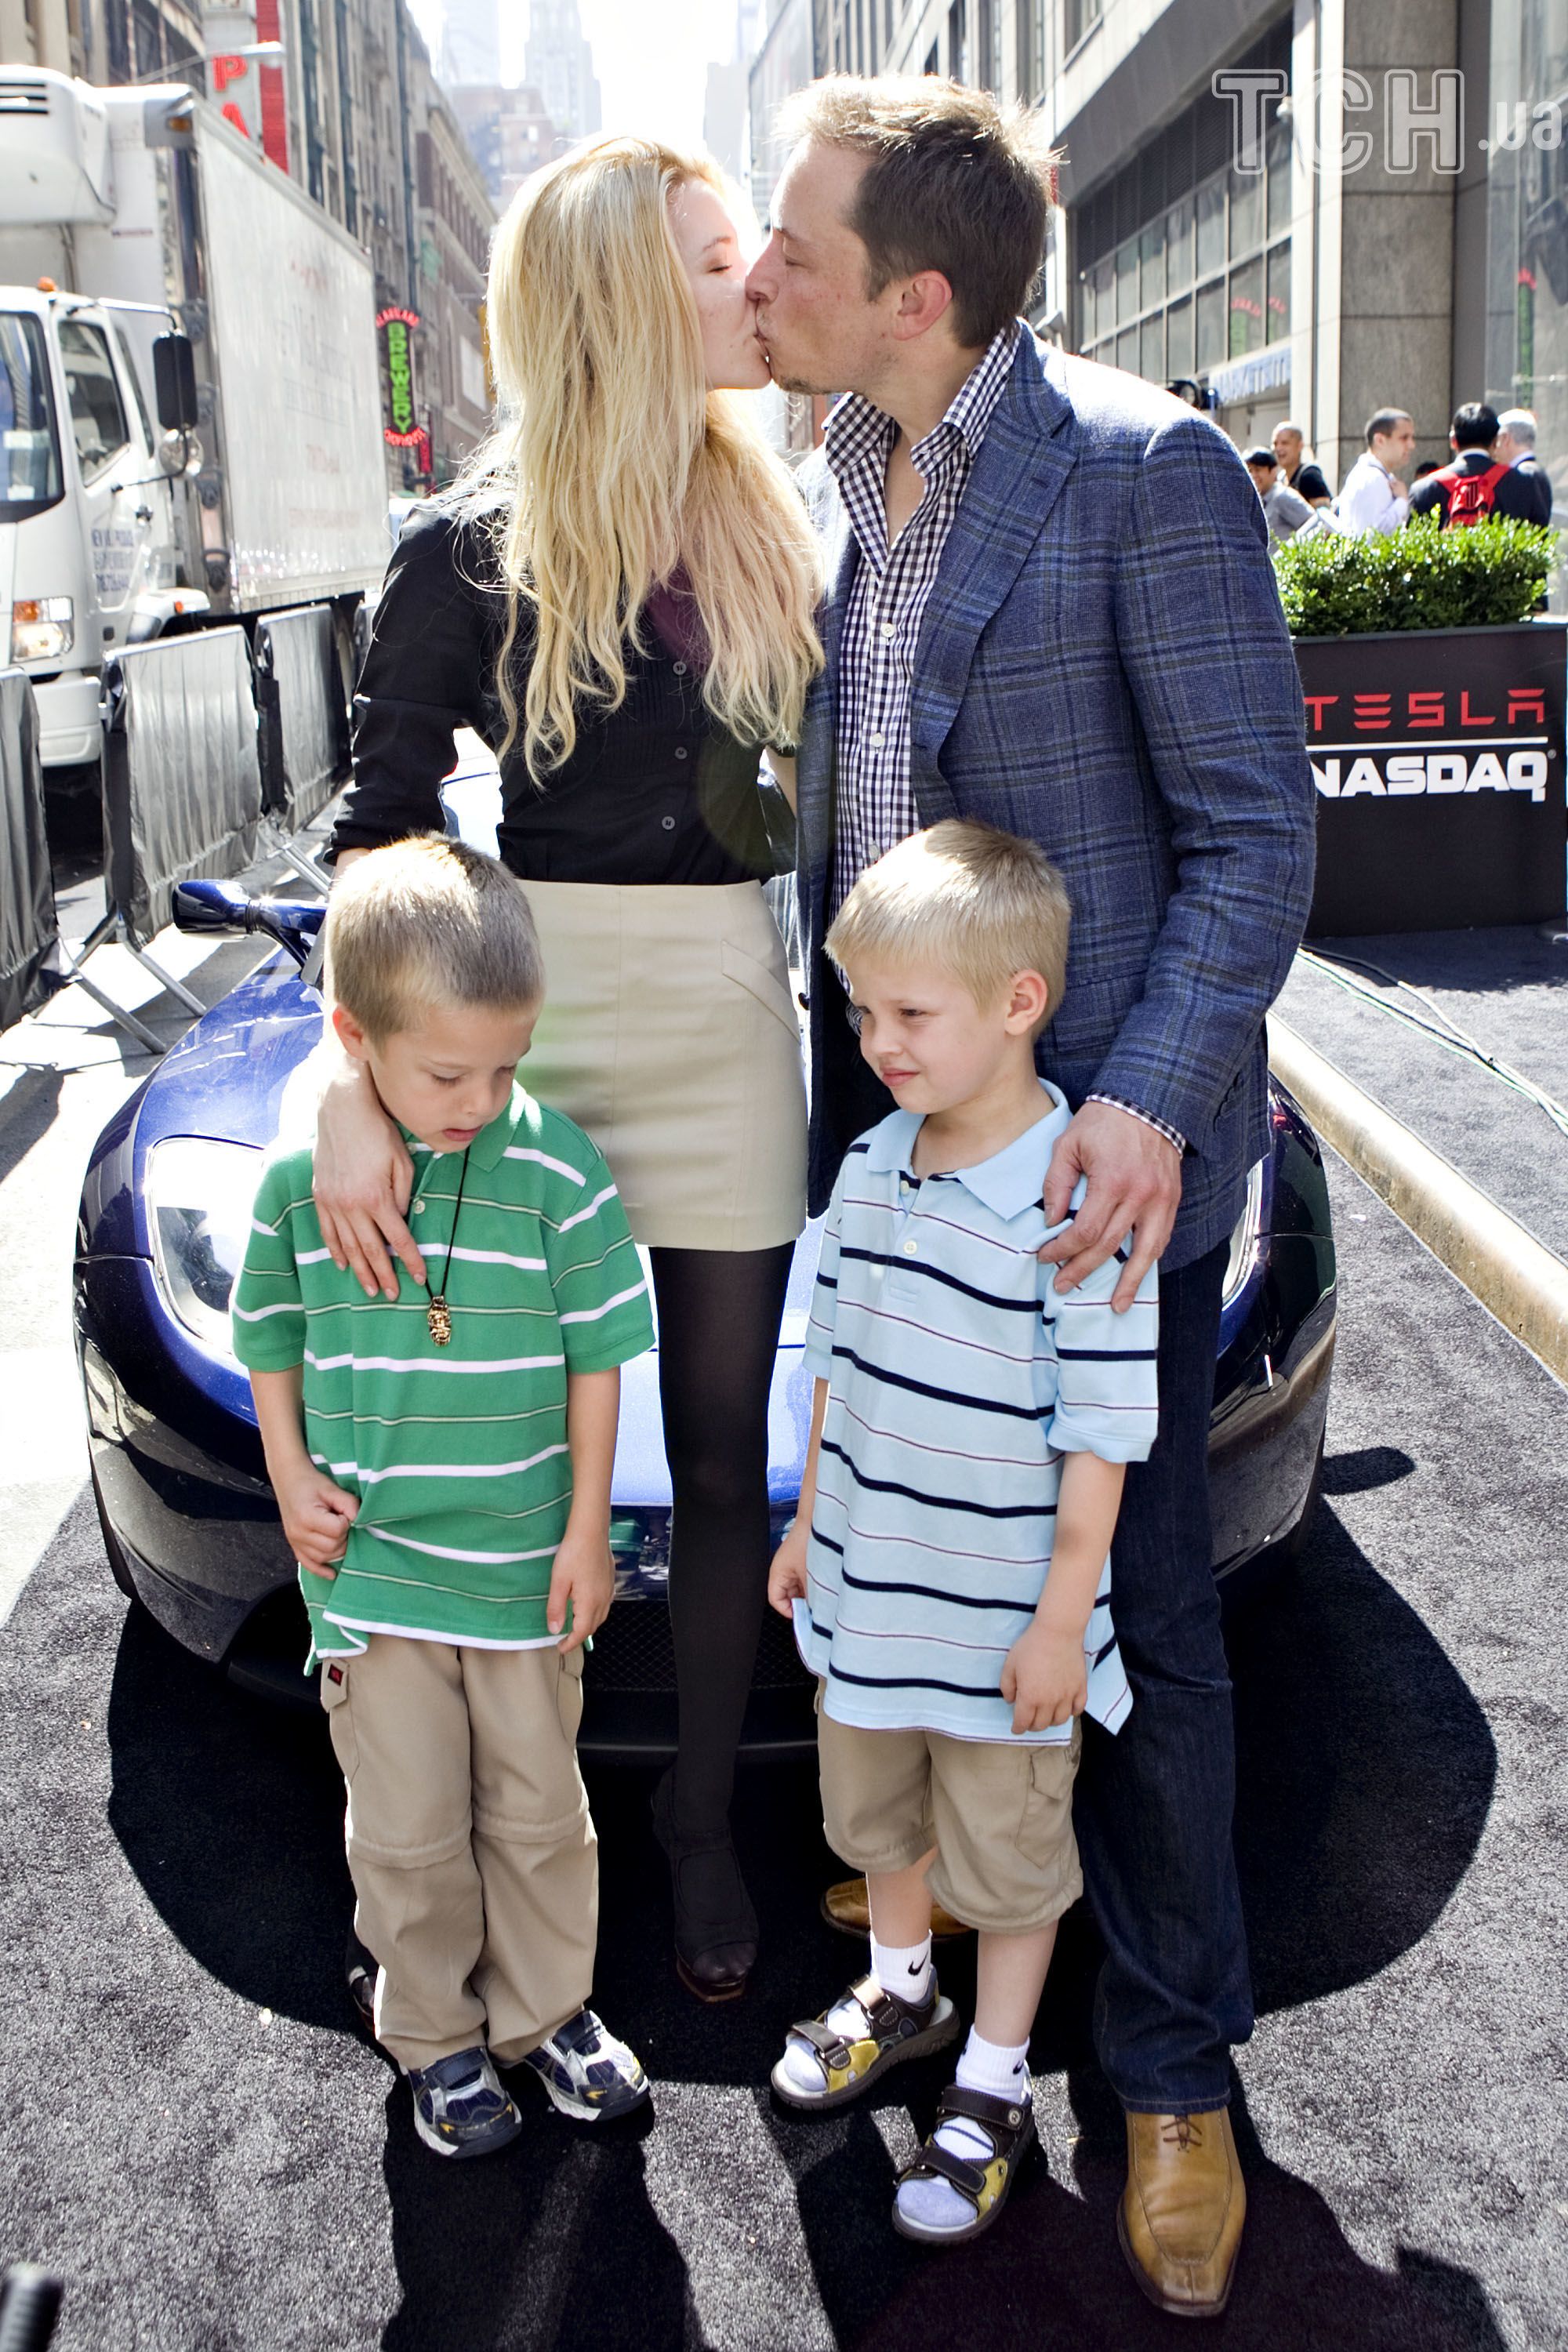 Elon Musk with his ex-wife Justine and their son Xavier in a blue T-shirt / © Getty Images